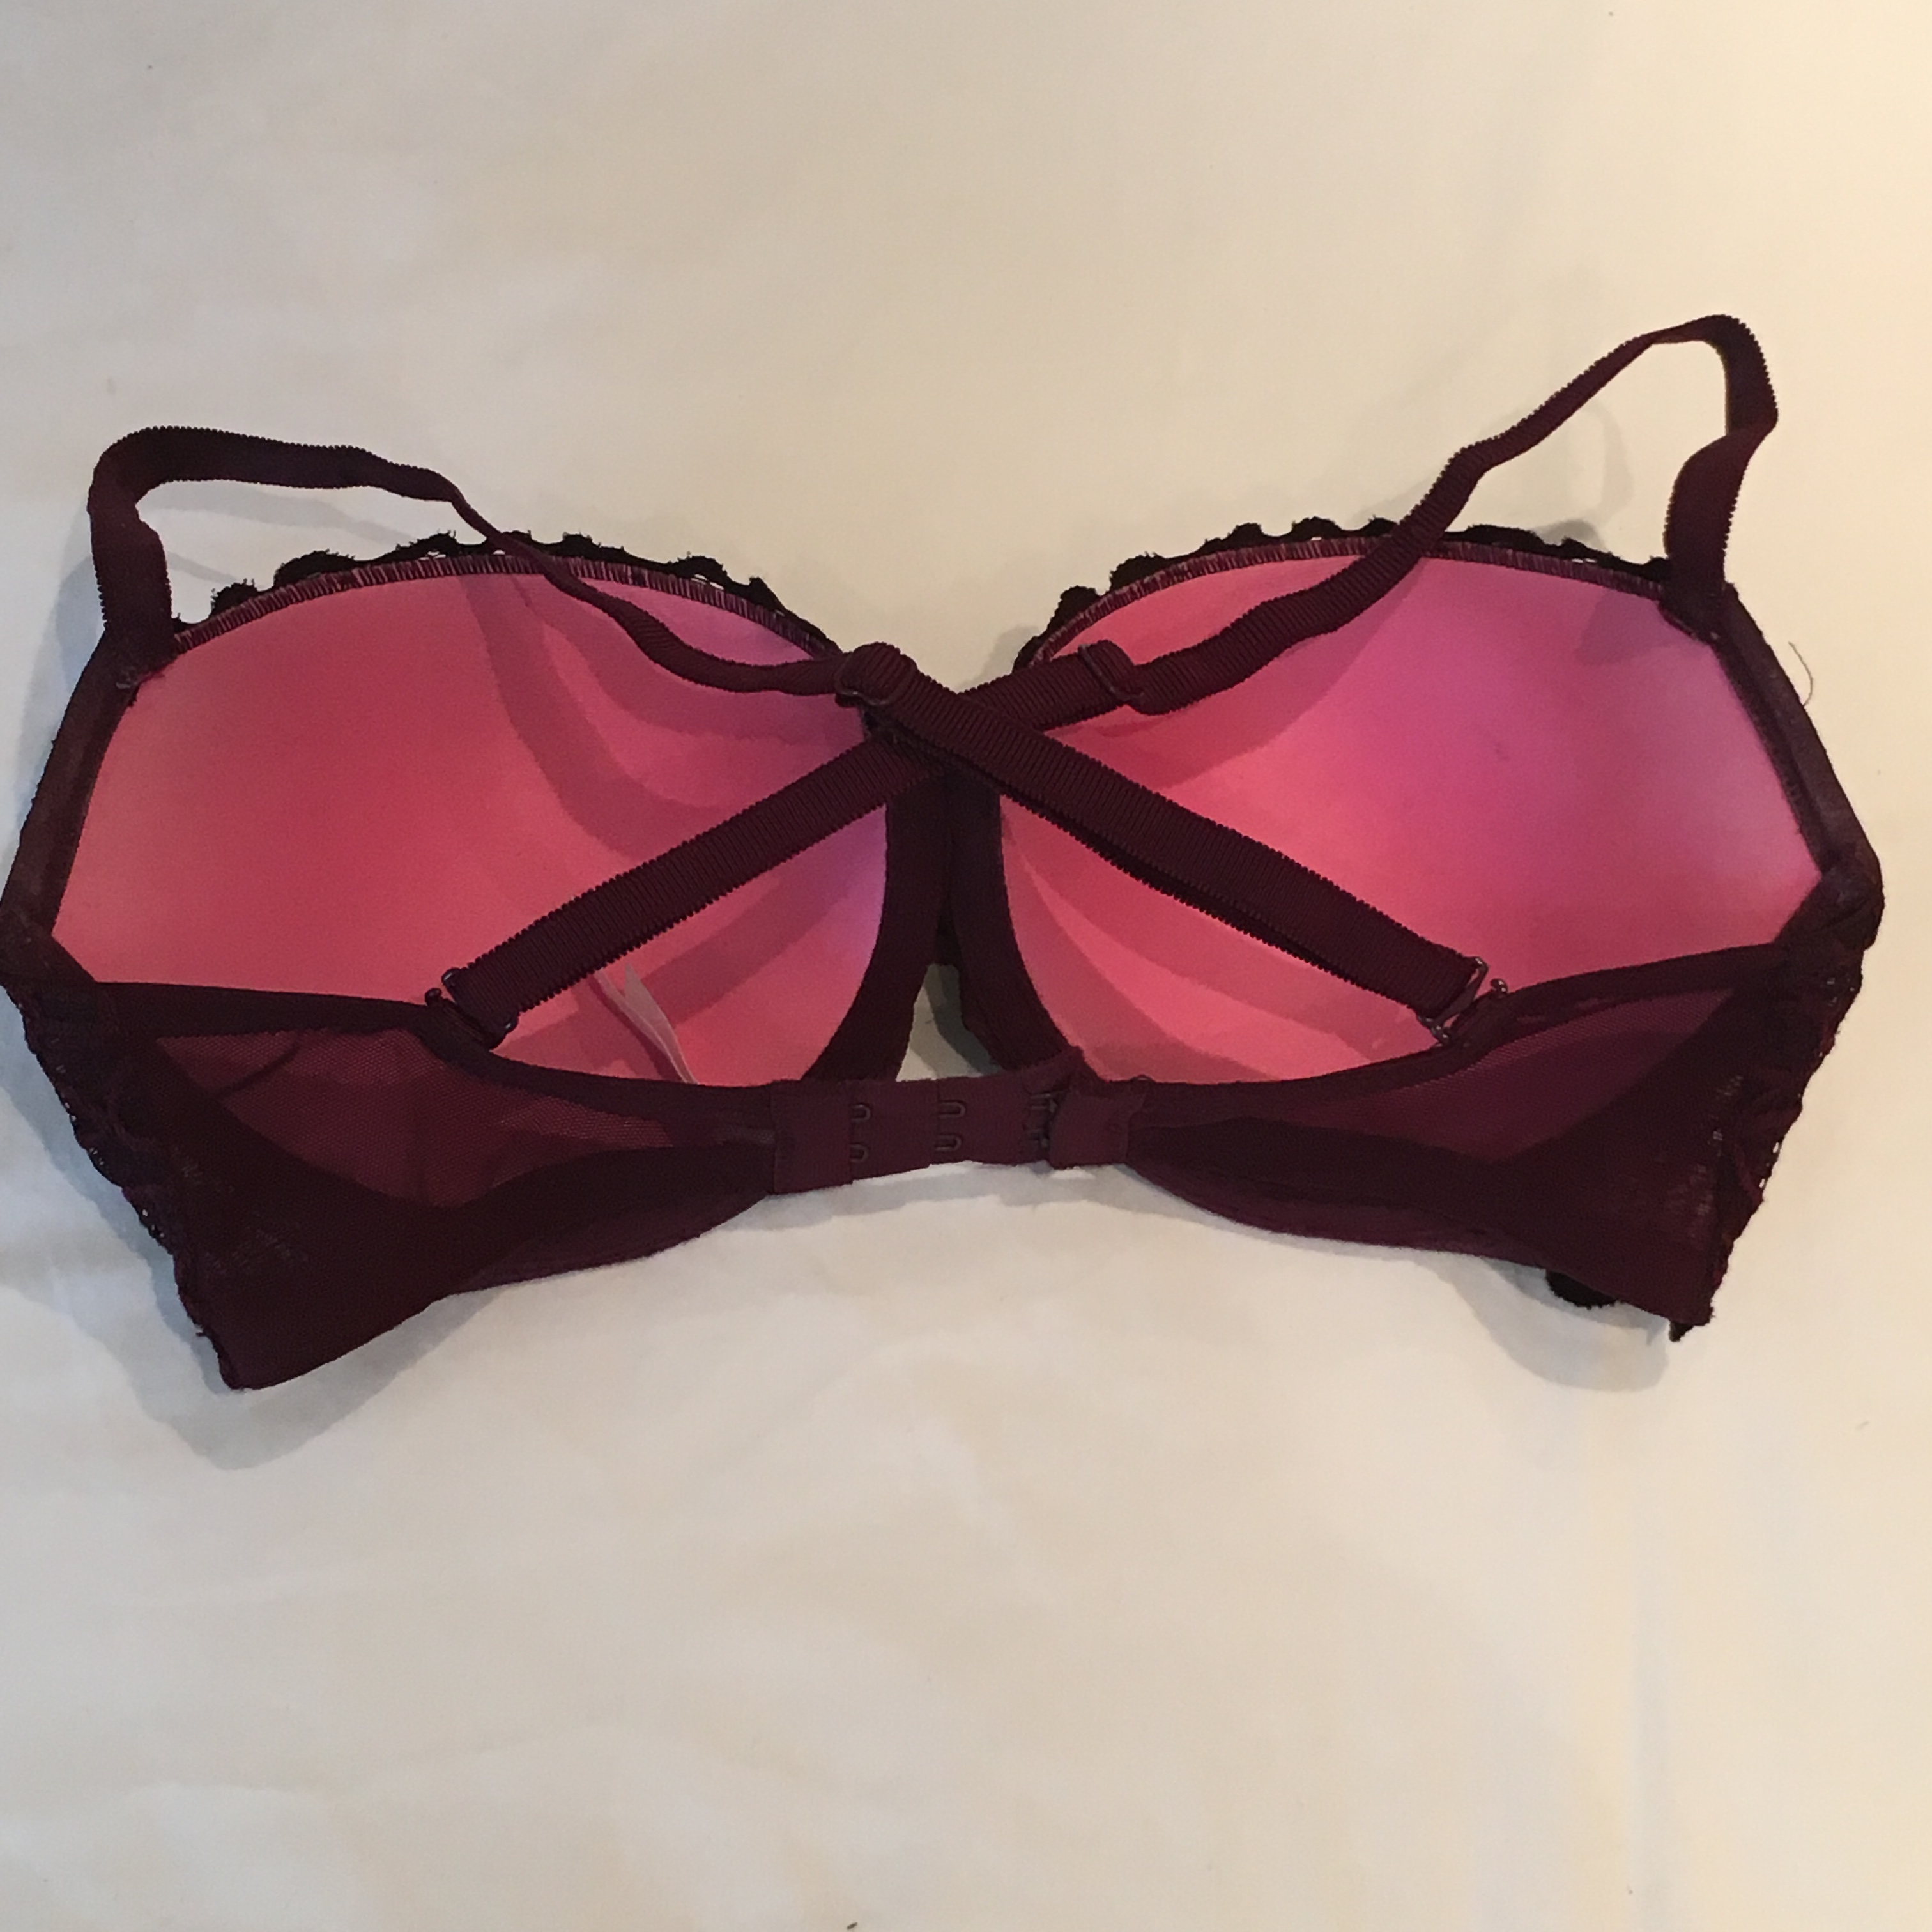 PINK Date Push-Up bra review